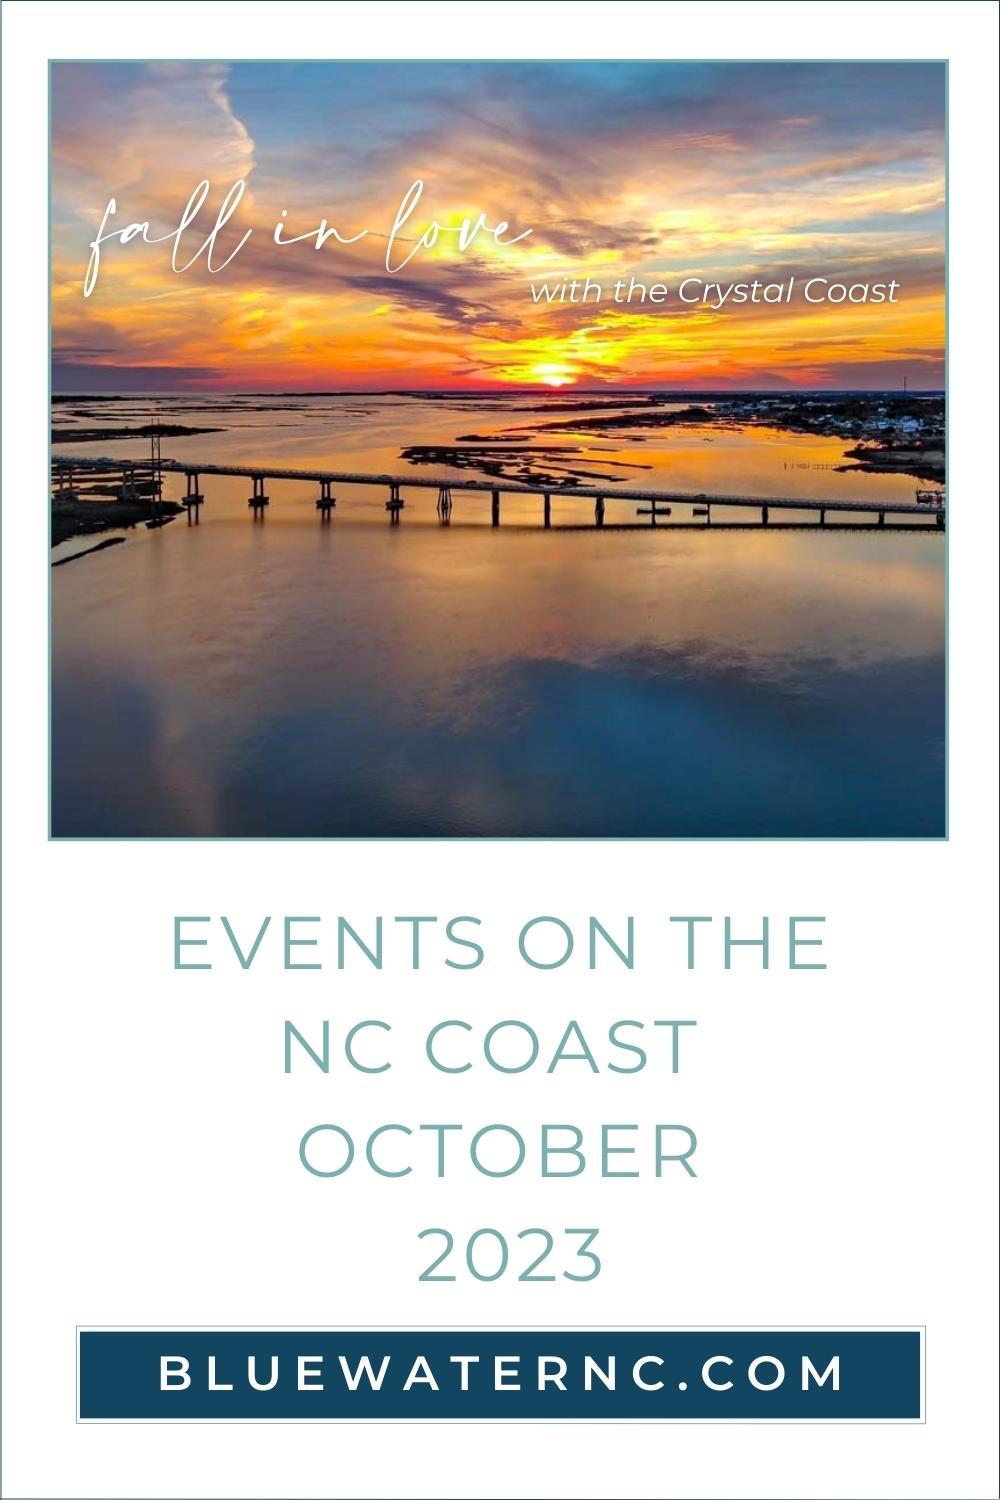 Events on the NC coast October 2023 pin